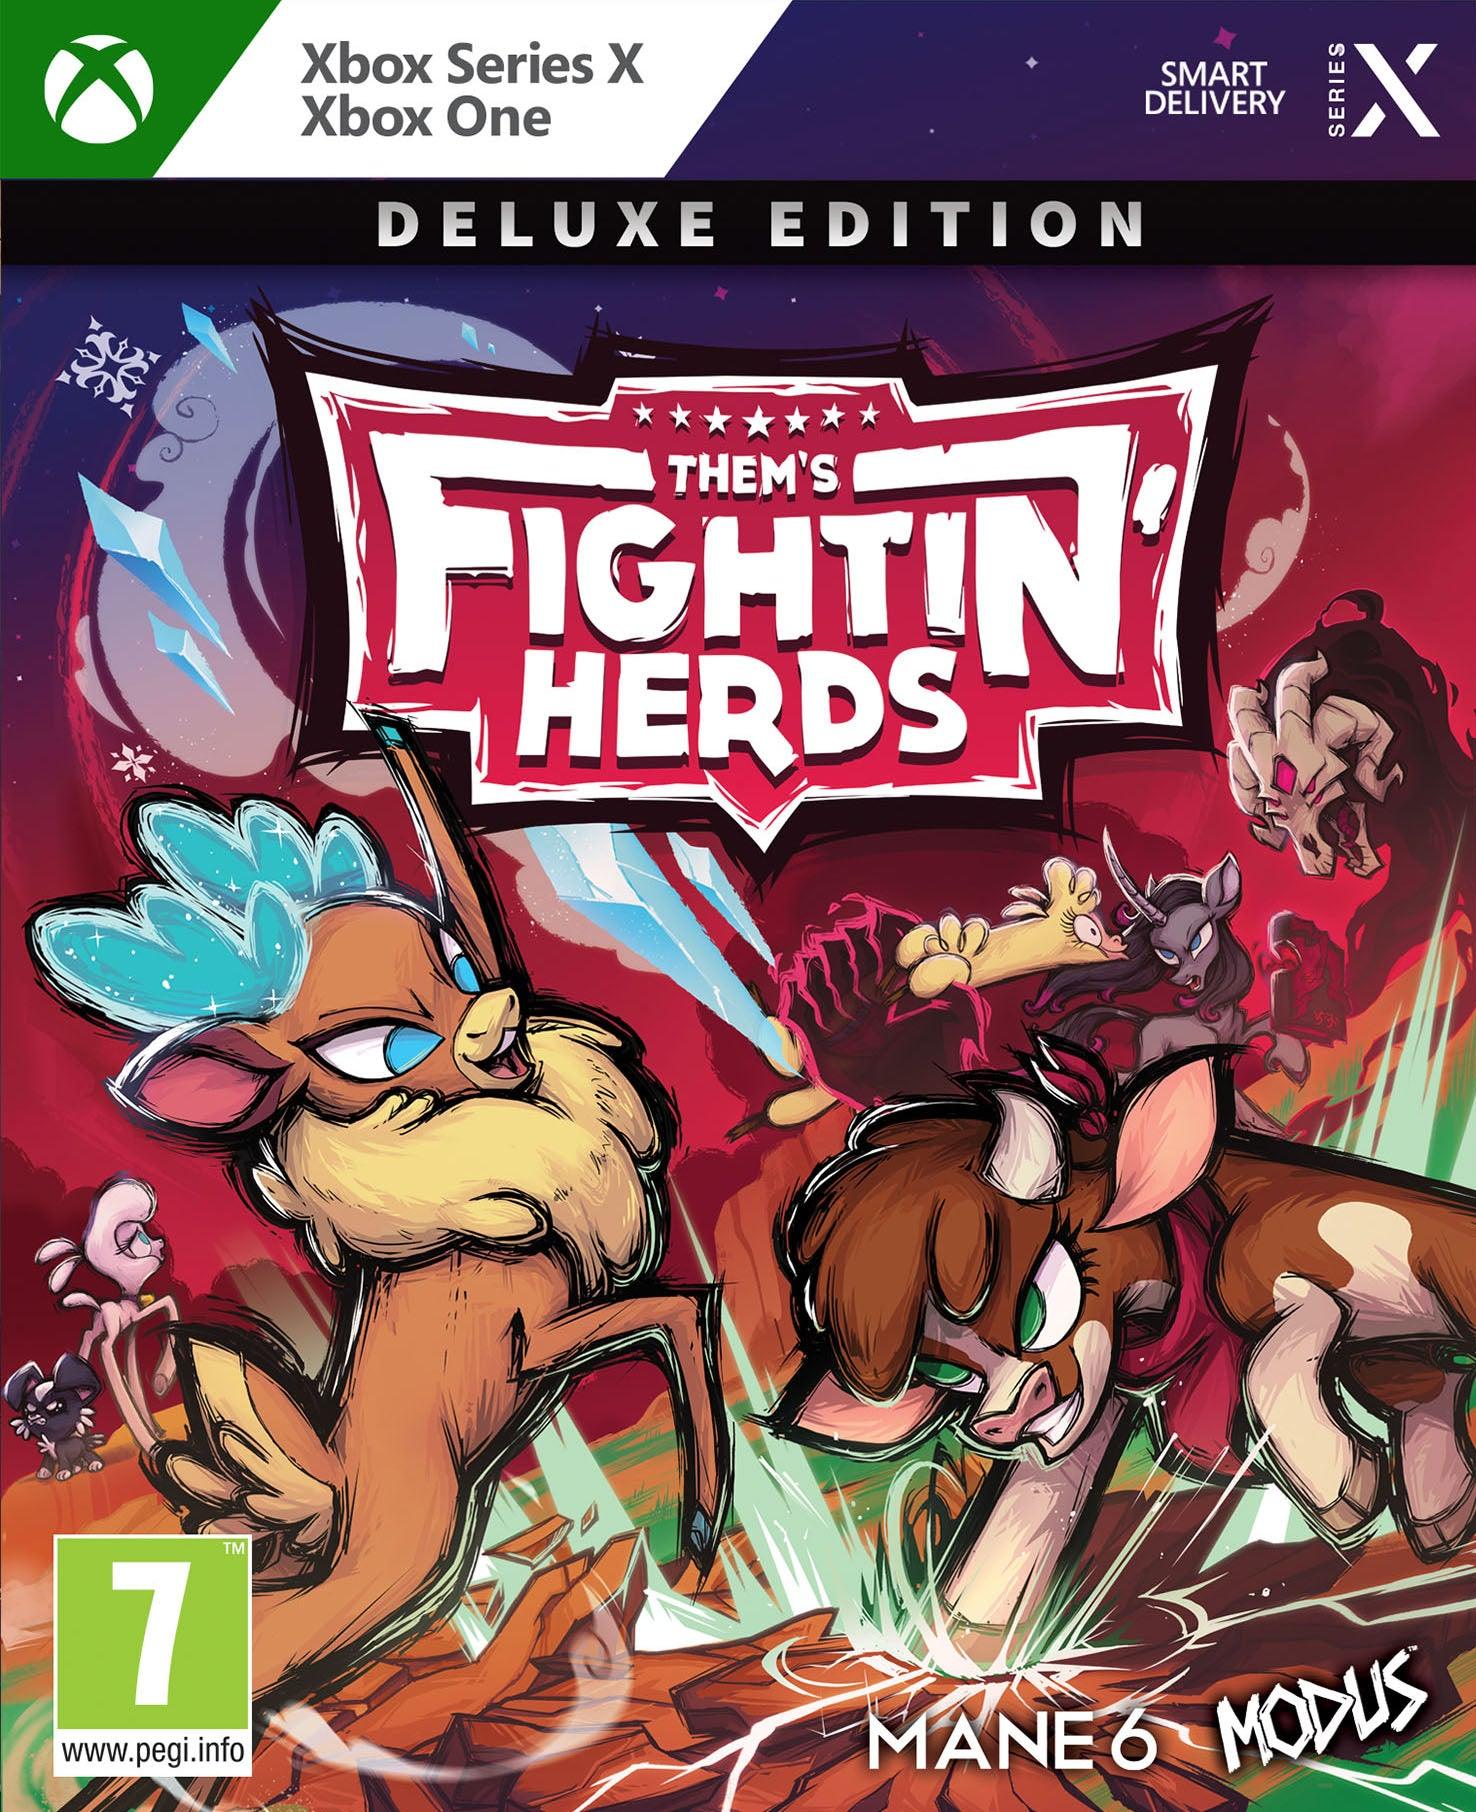 Thems Fightin Herds Dlx Ed - Want a New Gadget